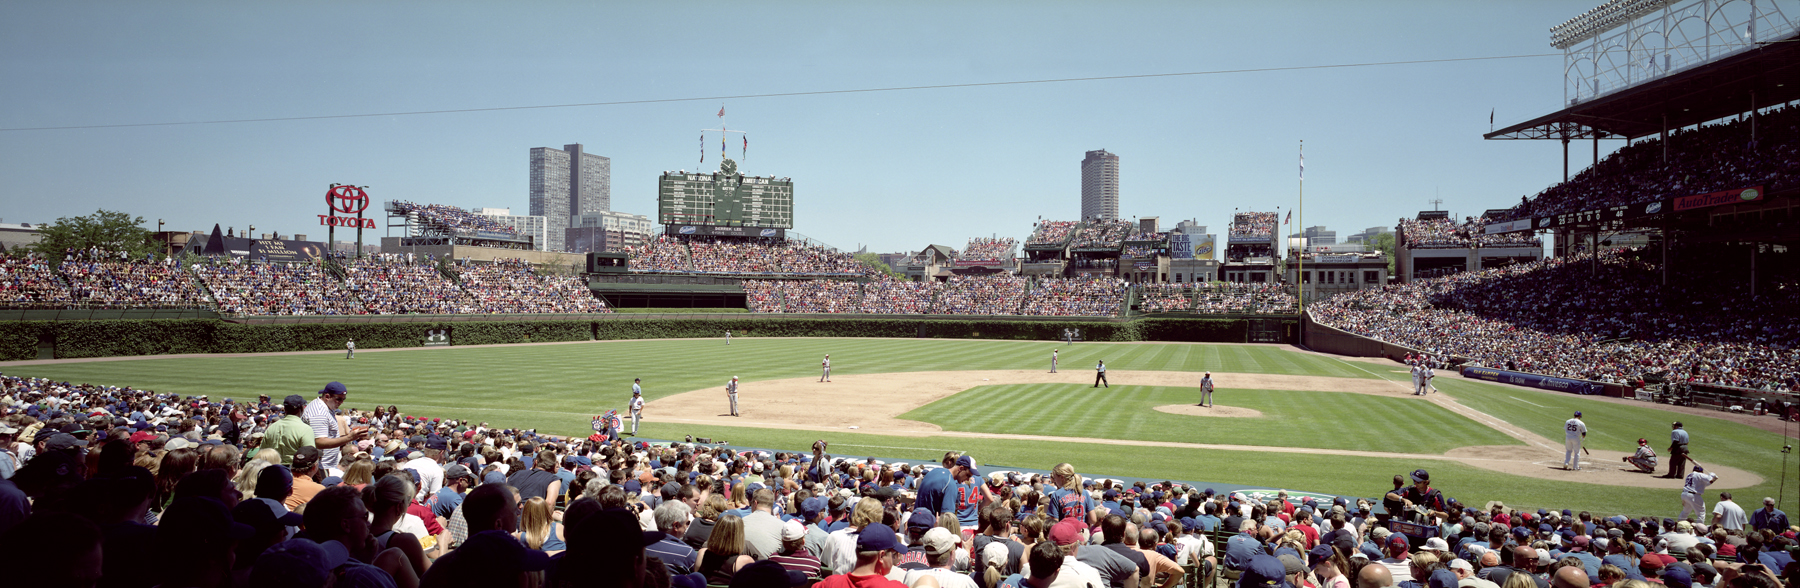 Chicago Cubs Wallpaper Of Wrigley Field Panoramic Vs Reds